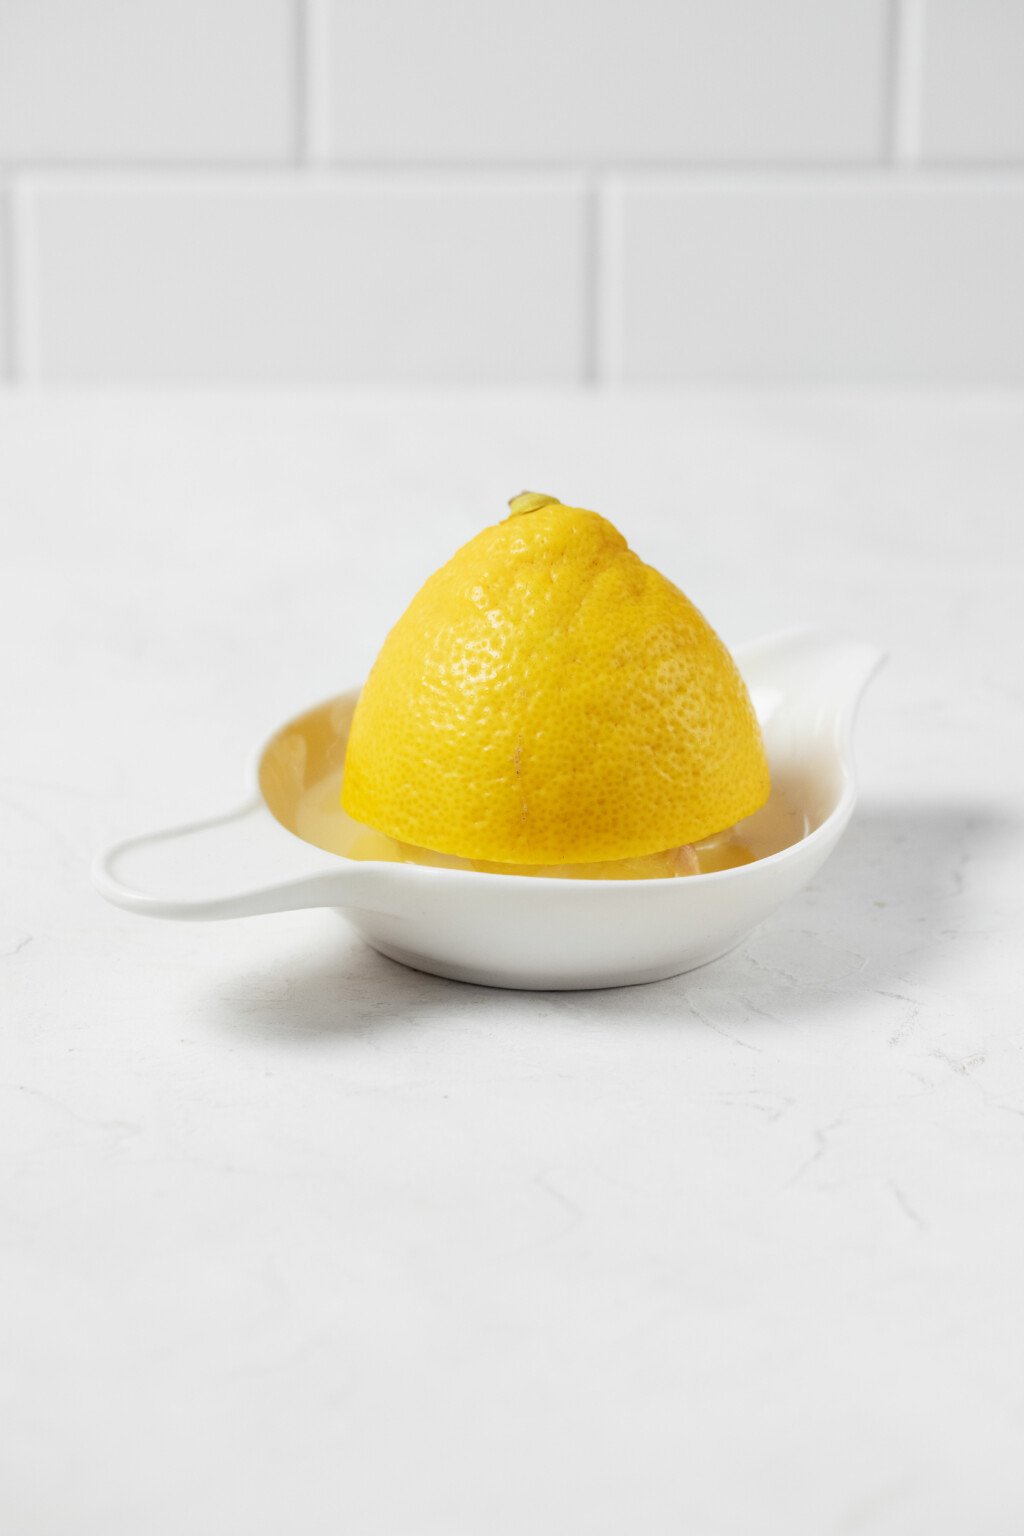 An image of a half lemon in a lemon squeezer, resting on a white surface.